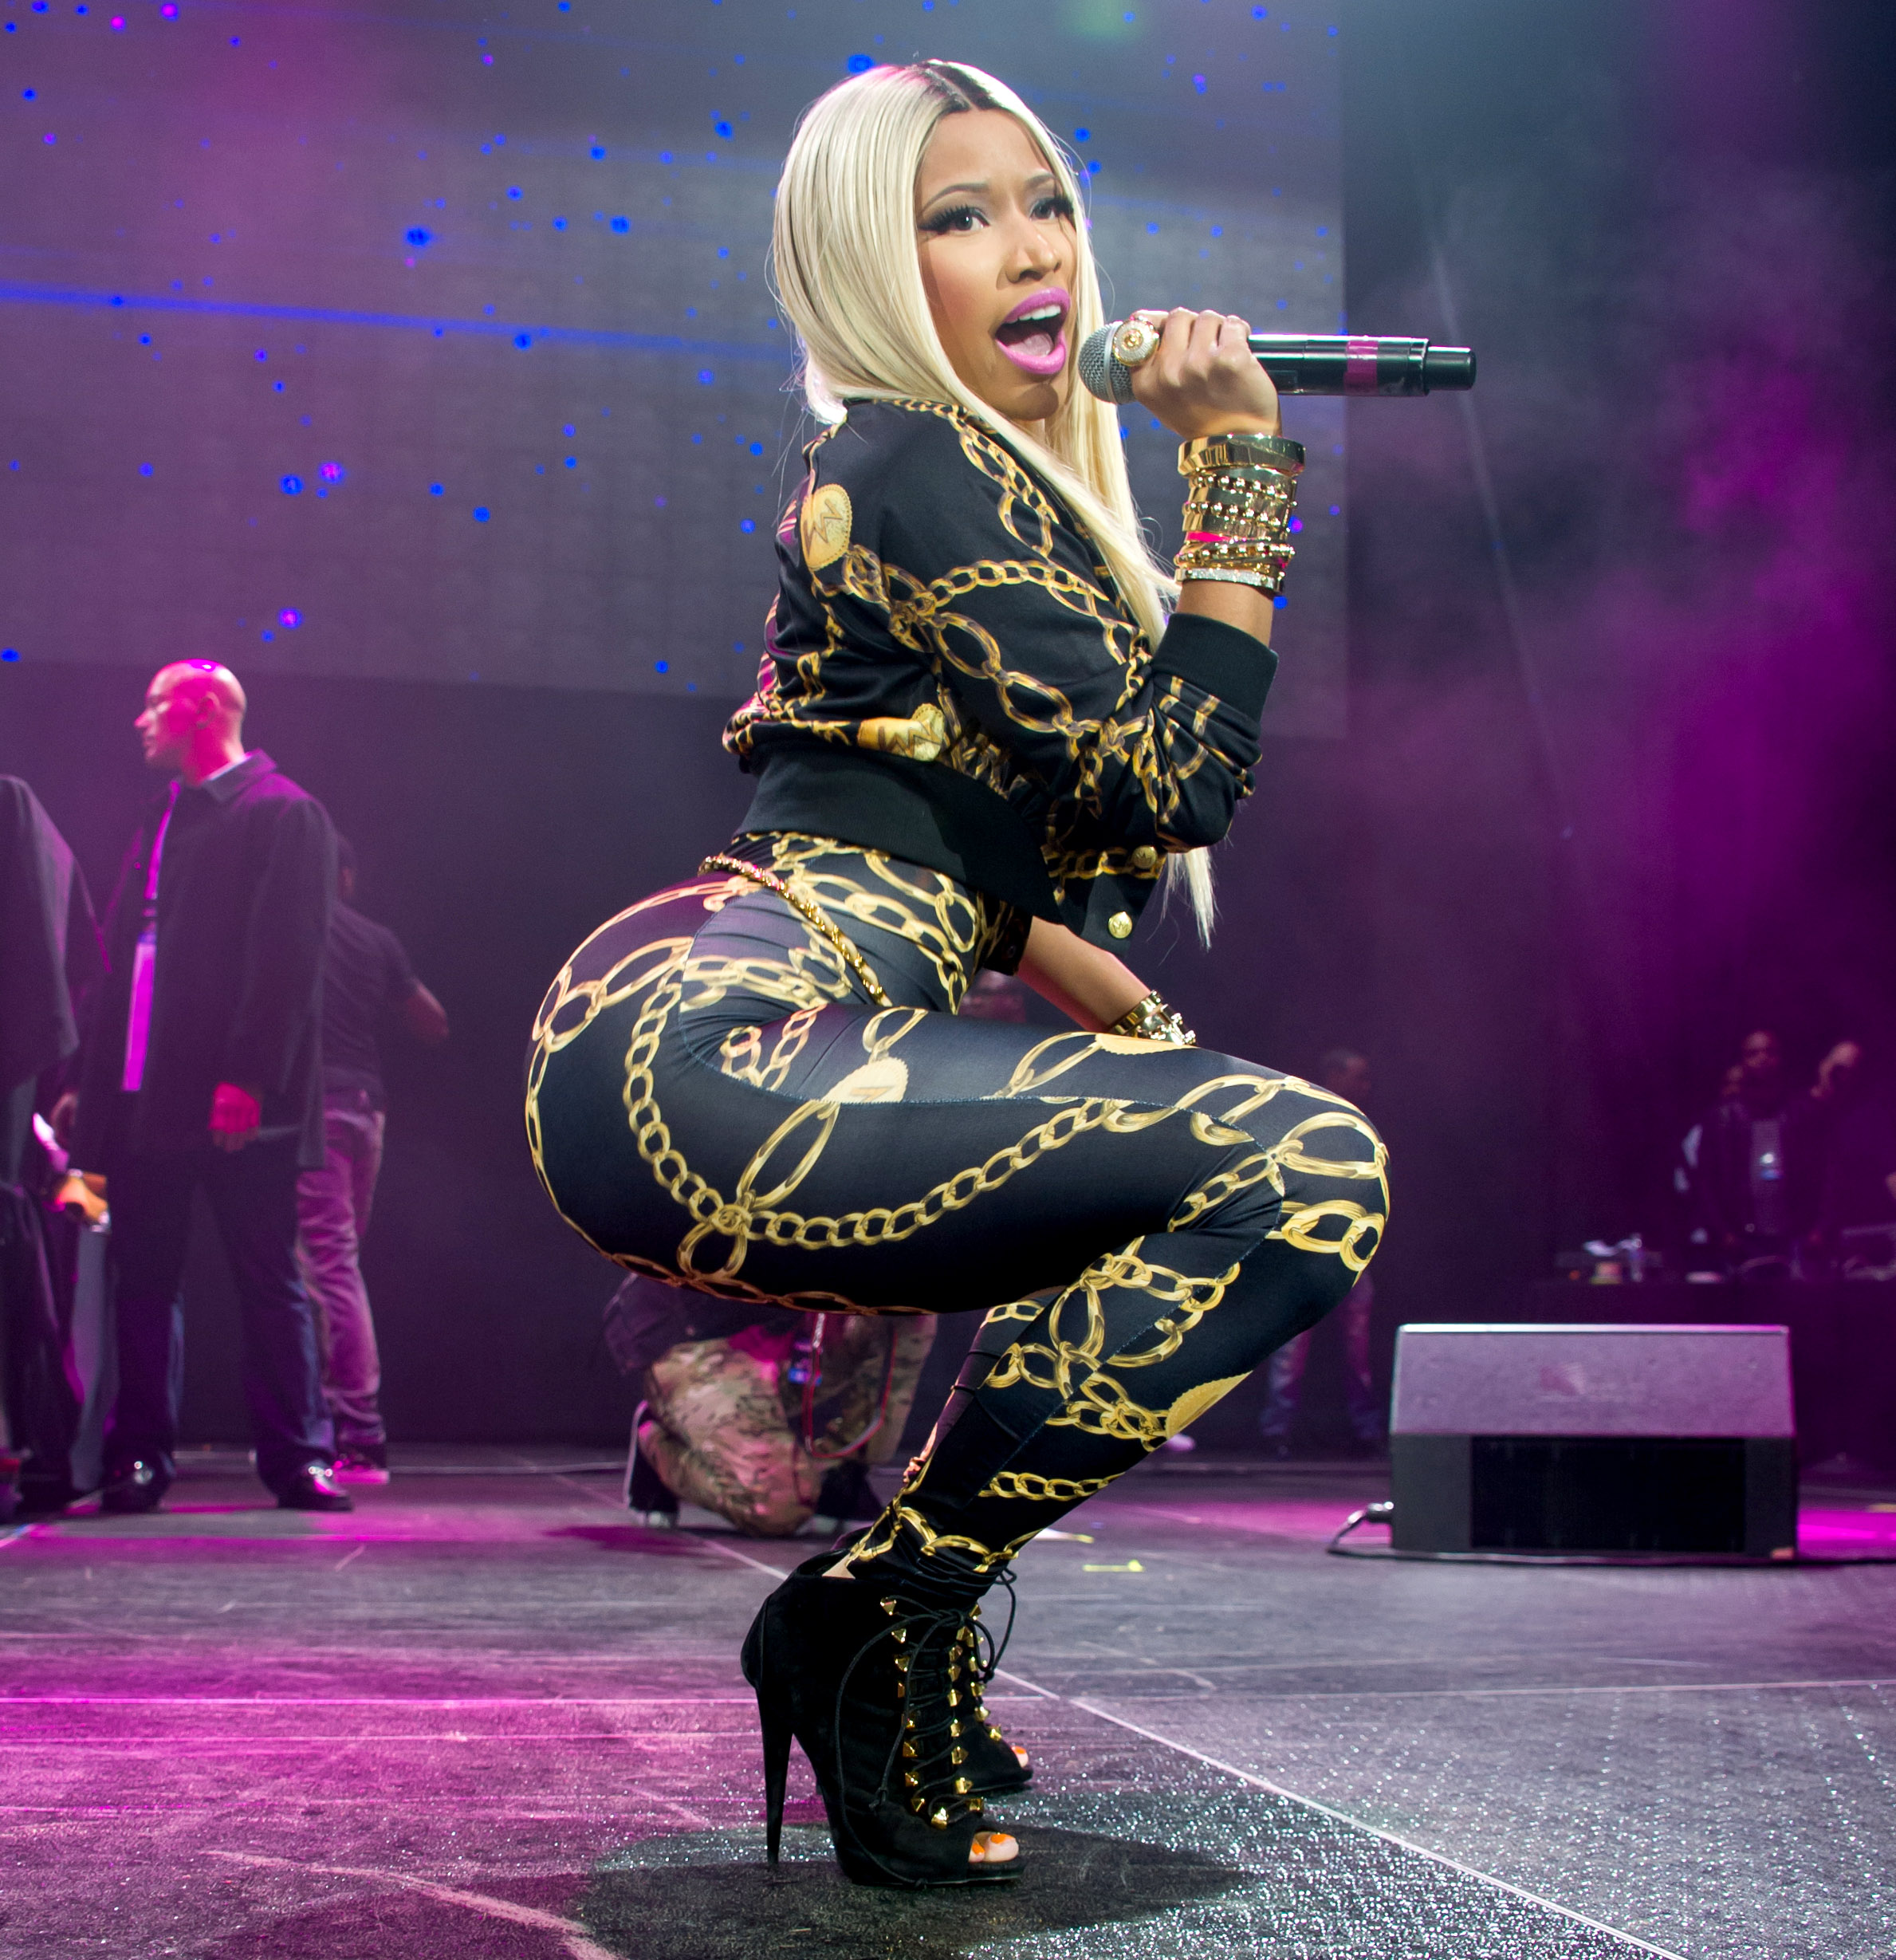 Rapper Nicki Minaj performs during Power 105.1 Powerhouse 2013 at Barclays Center on November 2, 2013 in the Brooklyn borough of New York City.